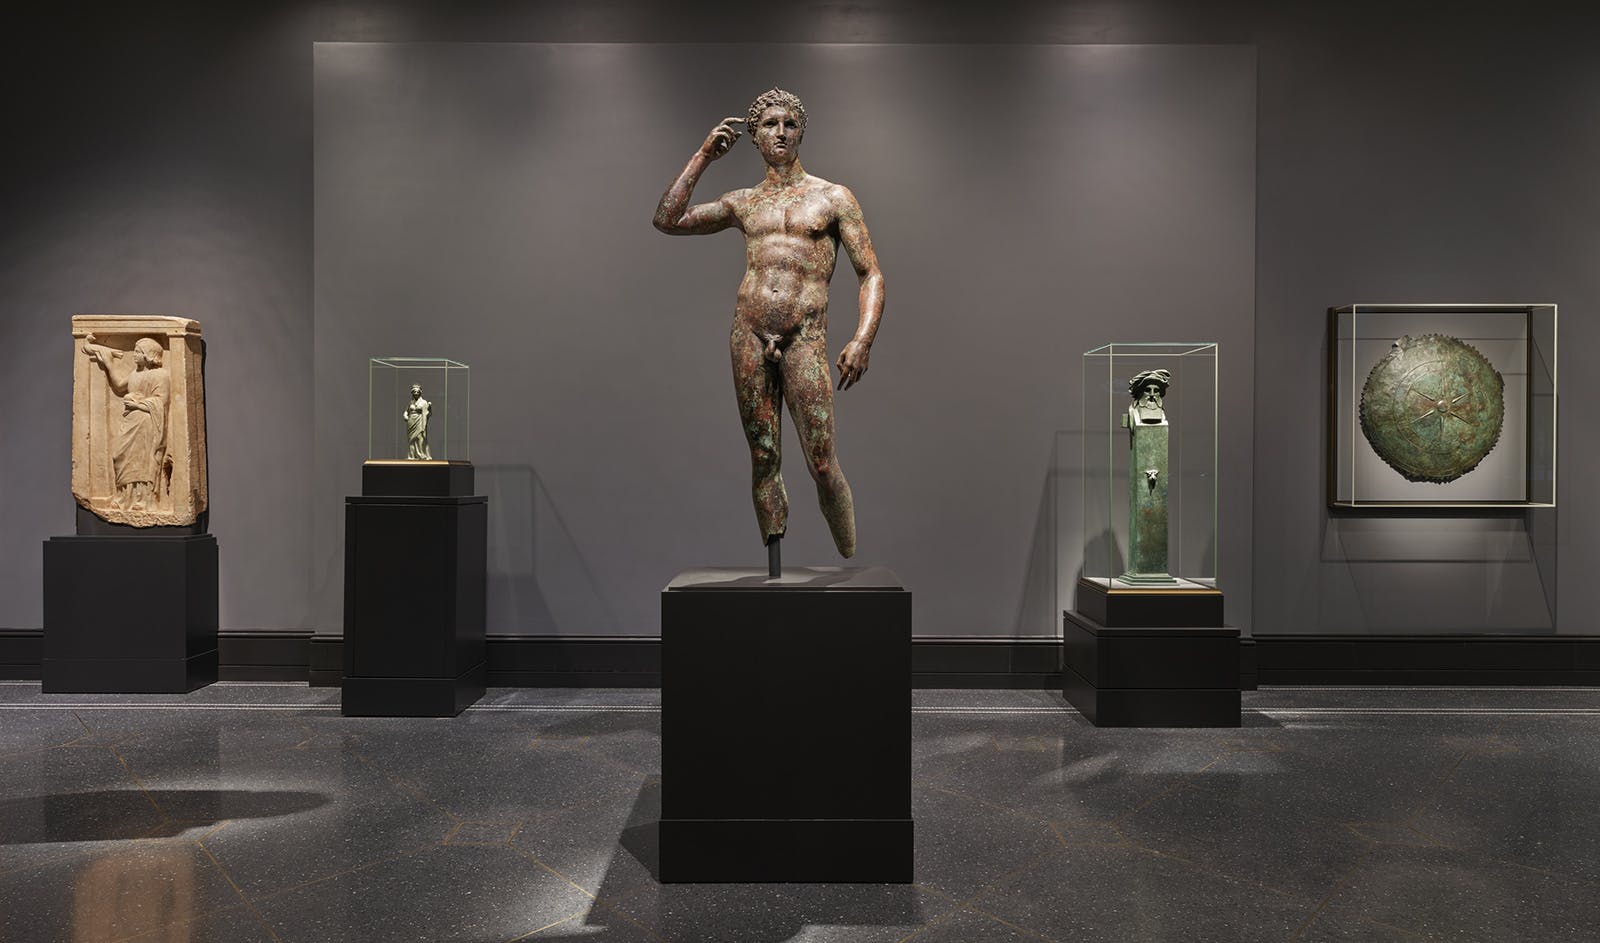 Installation view of Statue of a Victorious Youth at the Getty Villa, Spring 2018.